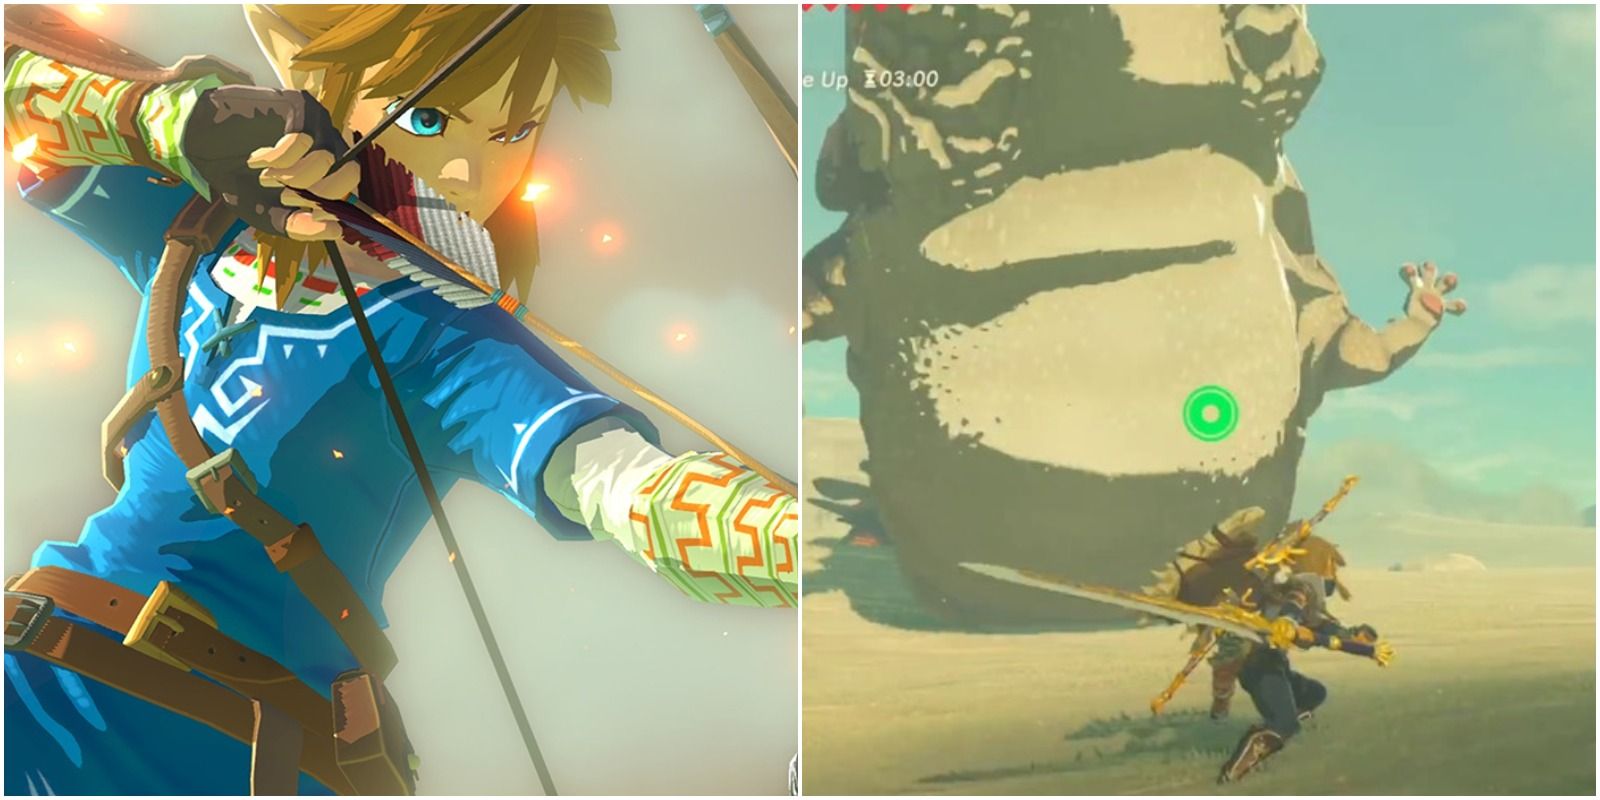 Link wielding a bow (left); a moldug in BotW (right)